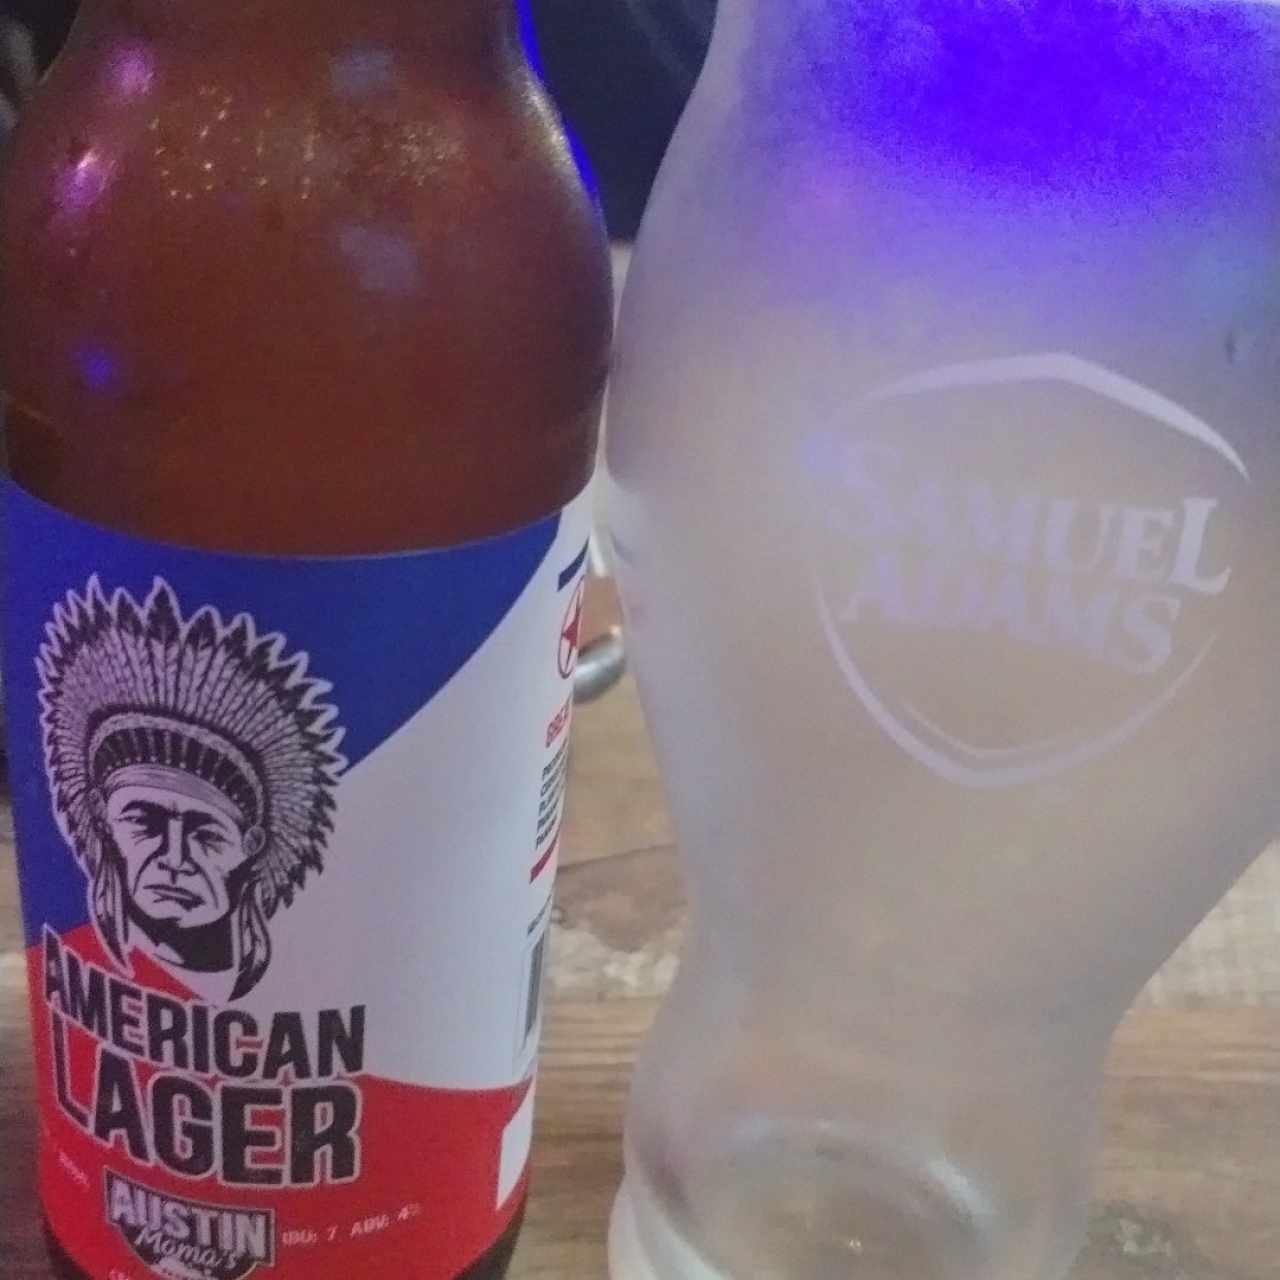 American lager